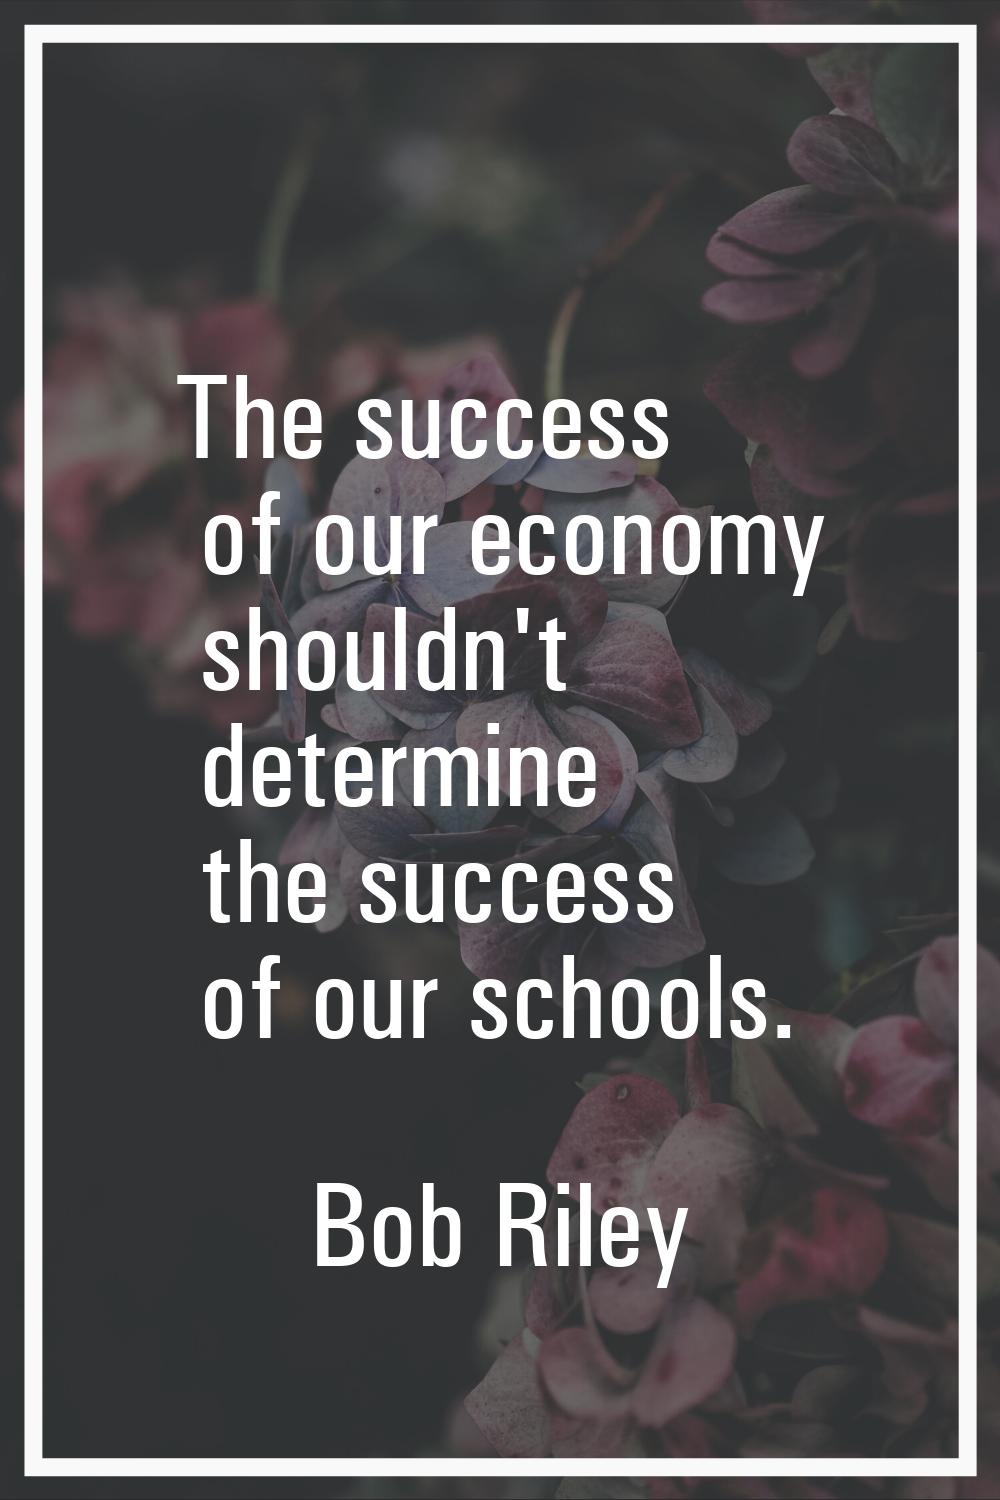 The success of our economy shouldn't determine the success of our schools.